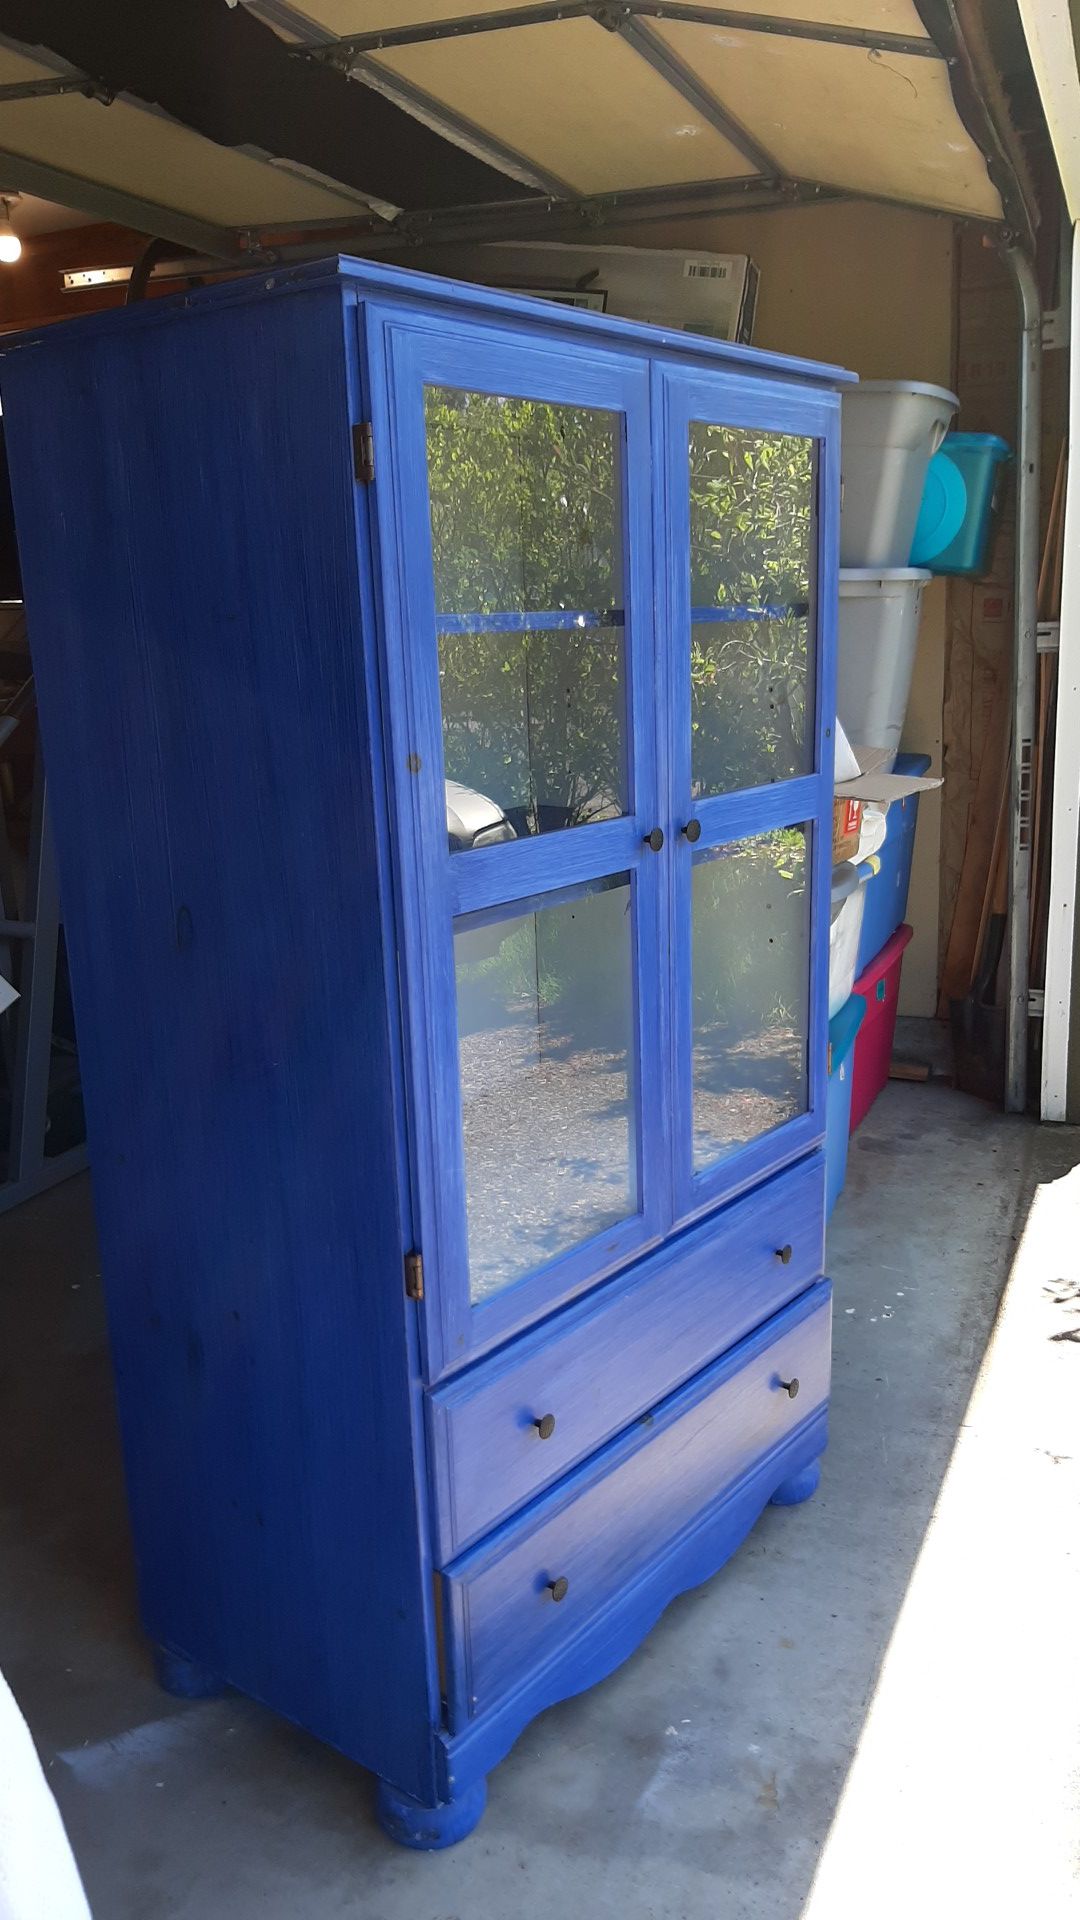 Cabinet with glass doors